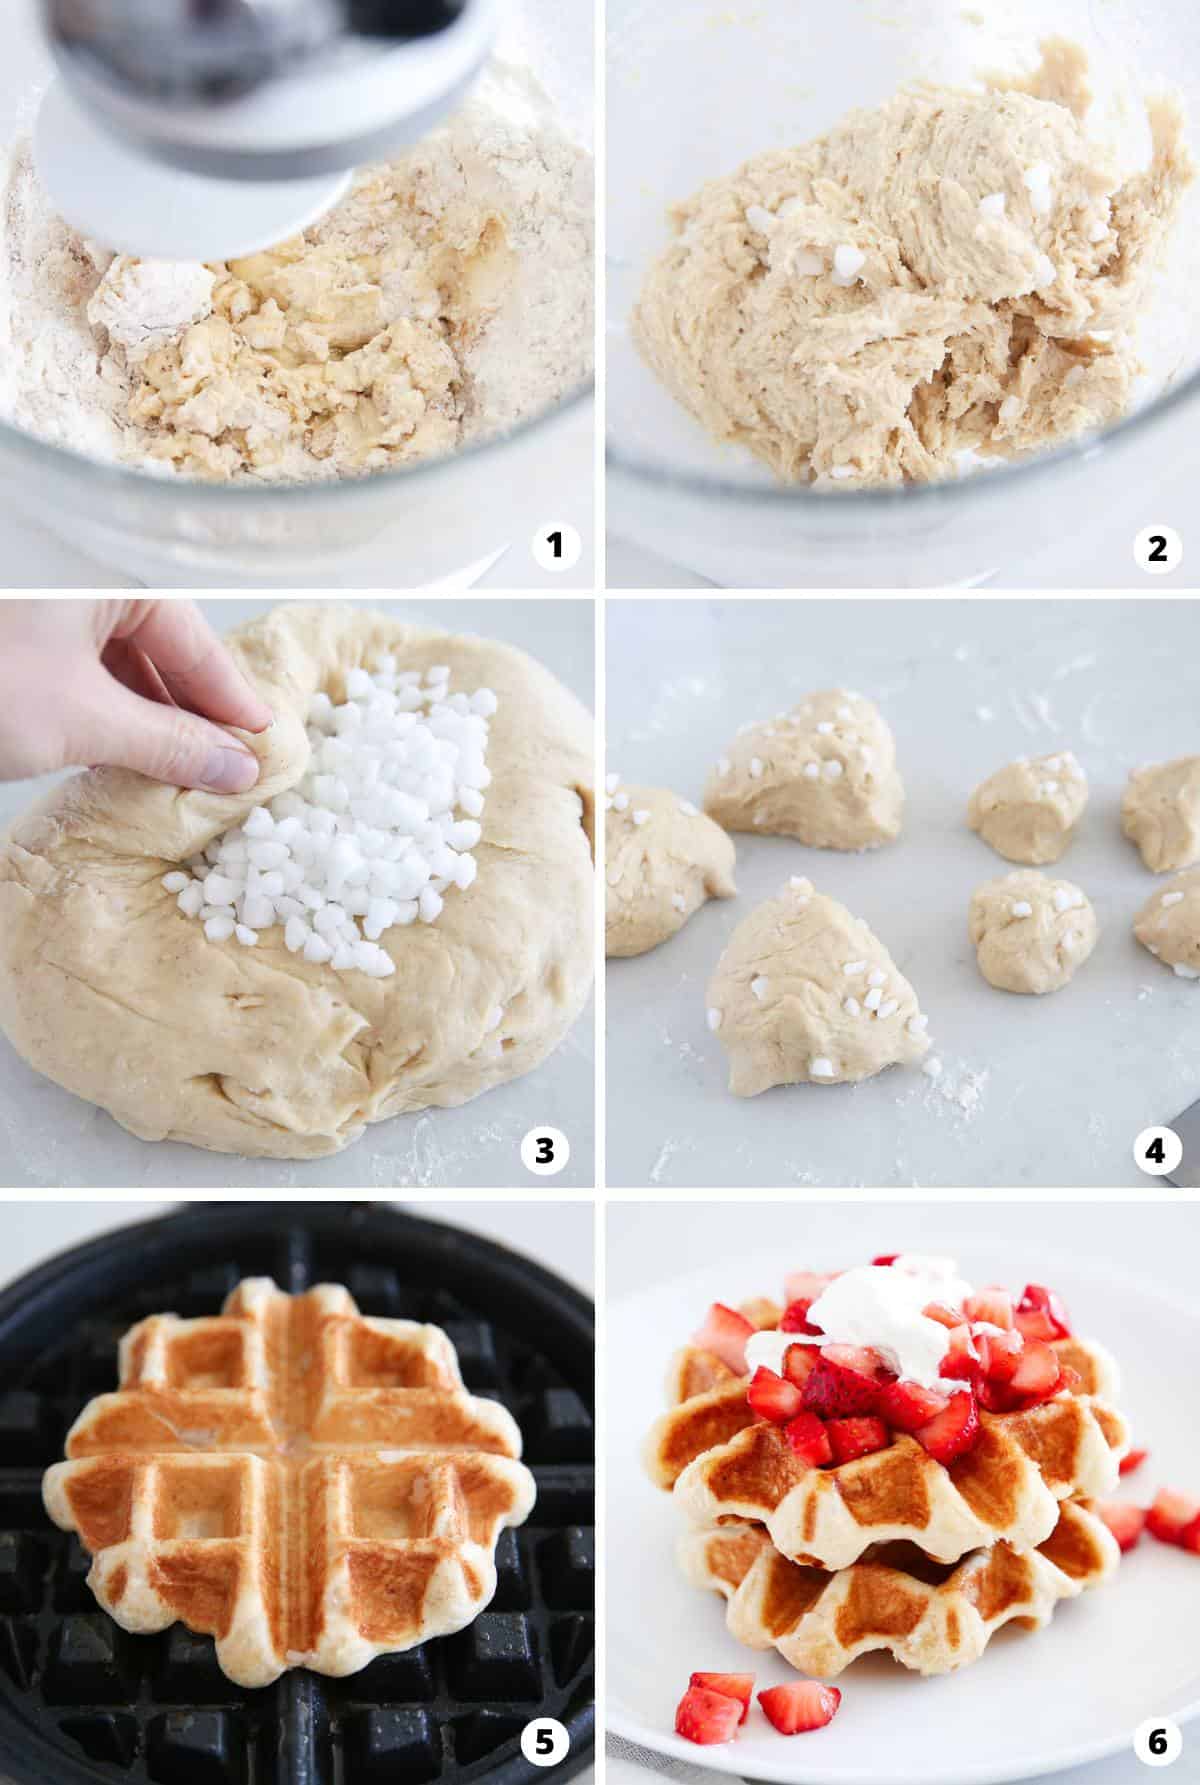 Showing how to make liege waffles in a 6 step collage.